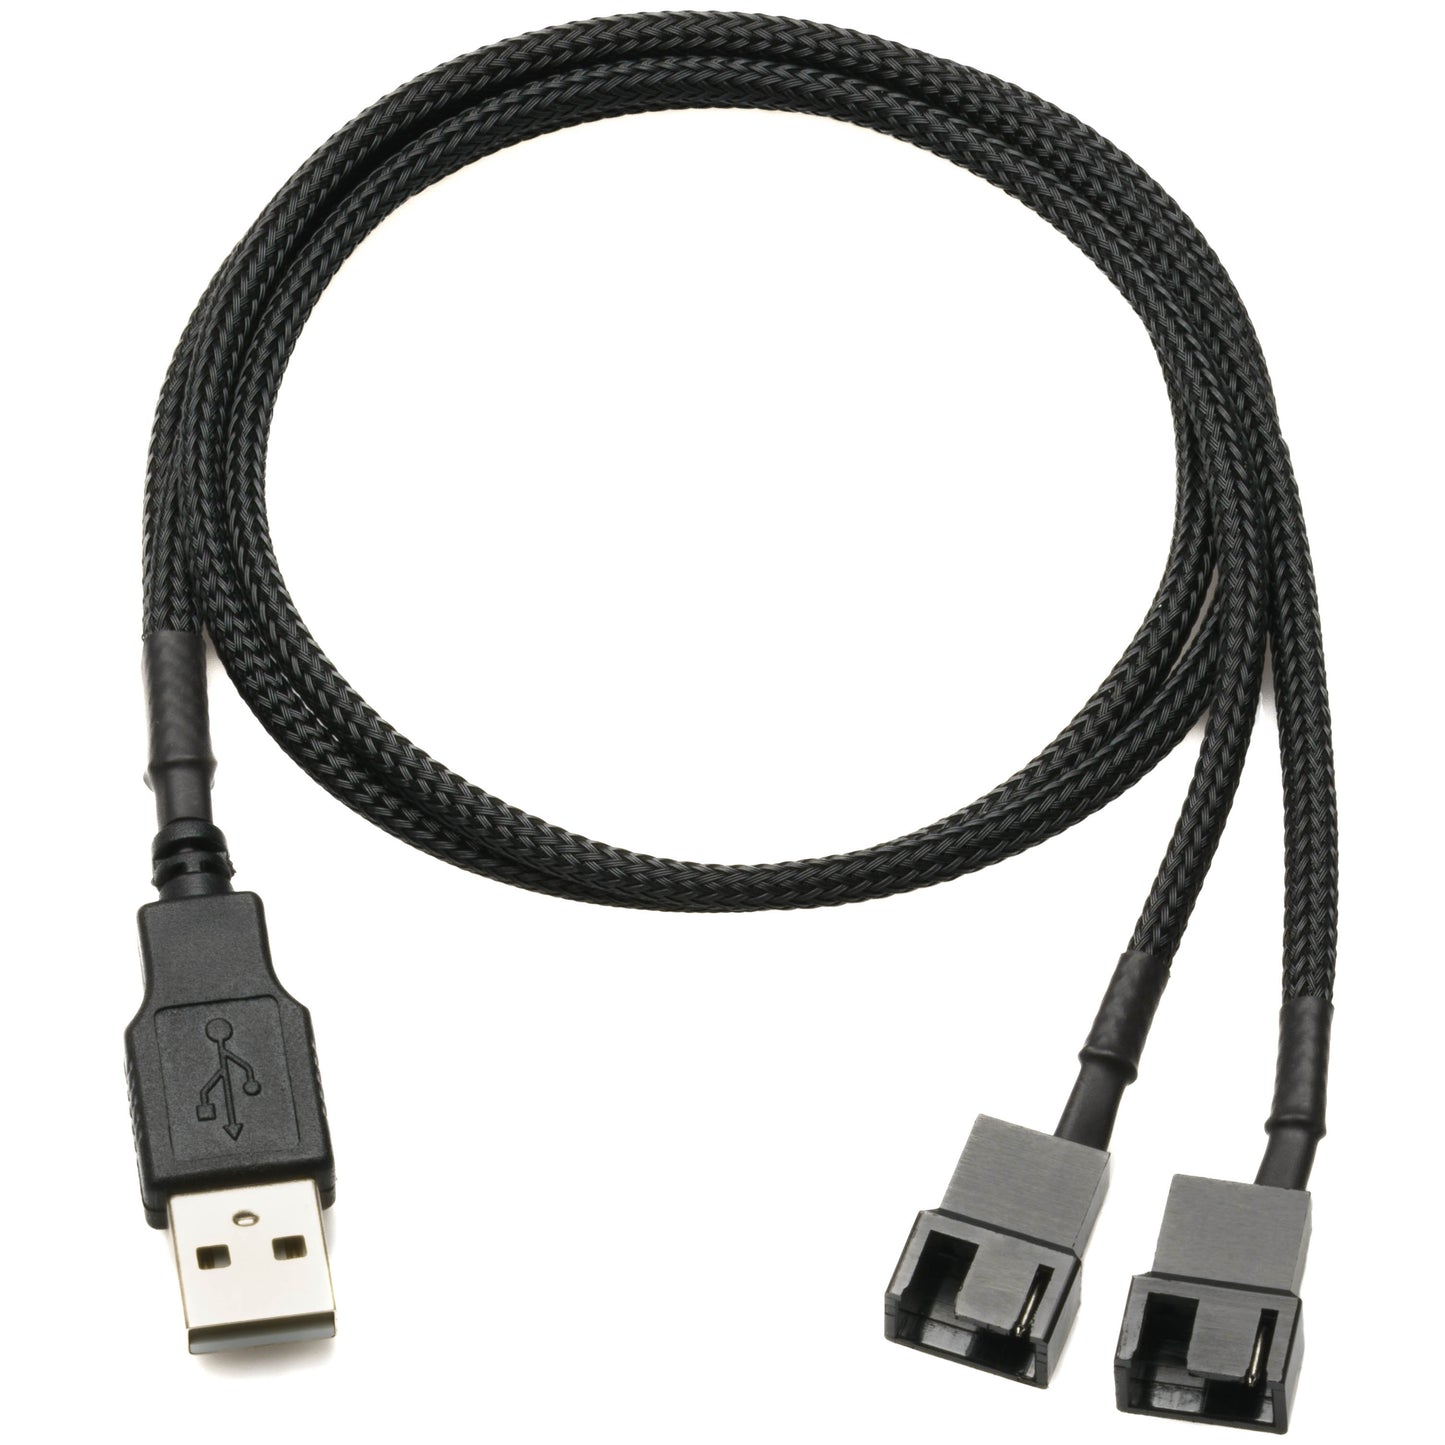 USB 5V to Dual 4-Pin Fan Power Adapter Cable